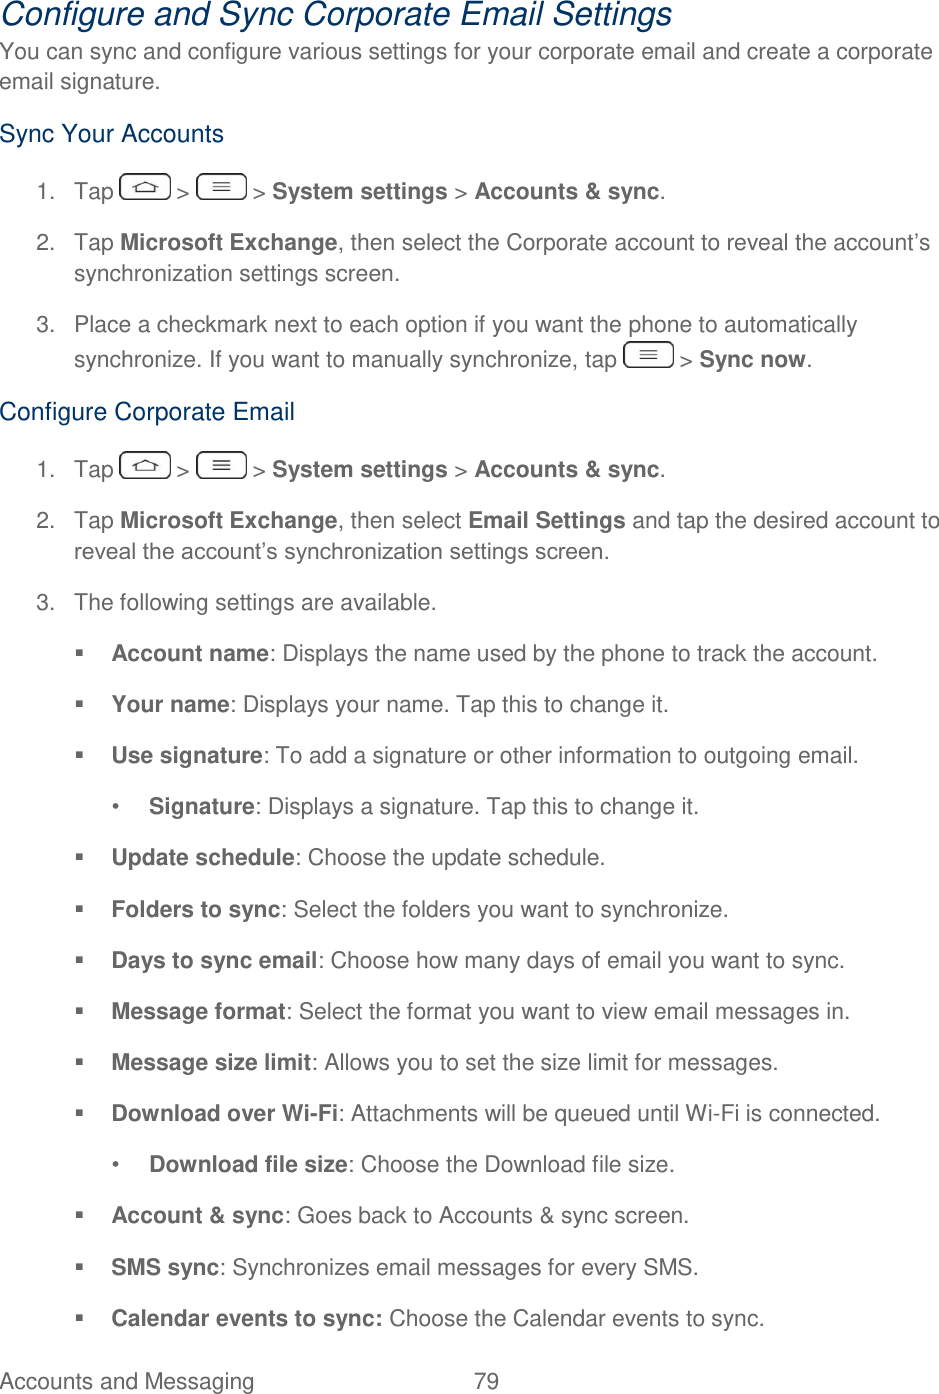  Accounts and Messaging  79   Configure and Sync Corporate Email Settings You can sync and configure various settings for your corporate email and create a corporate email signature. Sync Your Accounts 1.  Tap   &gt;   &gt; System settings &gt; Accounts &amp; sync. 2.  Tap Microsoft Exchange, then select the Corporate account to reveal the account‘s synchronization settings screen. 3.  Place a checkmark next to each option if you want the phone to automatically synchronize. If you want to manually synchronize, tap   &gt; Sync now. Configure Corporate Email 1.  Tap   &gt;   &gt; System settings &gt; Accounts &amp; sync. 2.  Tap Microsoft Exchange, then select Email Settings and tap the desired account to reveal the account‘s synchronization settings screen. 3.  The following settings are available.  Account name: Displays the name used by the phone to track the account.  Your name: Displays your name. Tap this to change it.  Use signature: To add a signature or other information to outgoing email. • Signature: Displays a signature. Tap this to change it.  Update schedule: Choose the update schedule.  Folders to sync: Select the folders you want to synchronize.  Days to sync email: Choose how many days of email you want to sync.  Message format: Select the format you want to view email messages in.  Message size limit: Allows you to set the size limit for messages.  Download over Wi-Fi: Attachments will be queued until Wi-Fi is connected. • Download file size: Choose the Download file size.   Account &amp; sync: Goes back to Accounts &amp; sync screen.  SMS sync: Synchronizes email messages for every SMS.  Calendar events to sync: Choose the Calendar events to sync. 